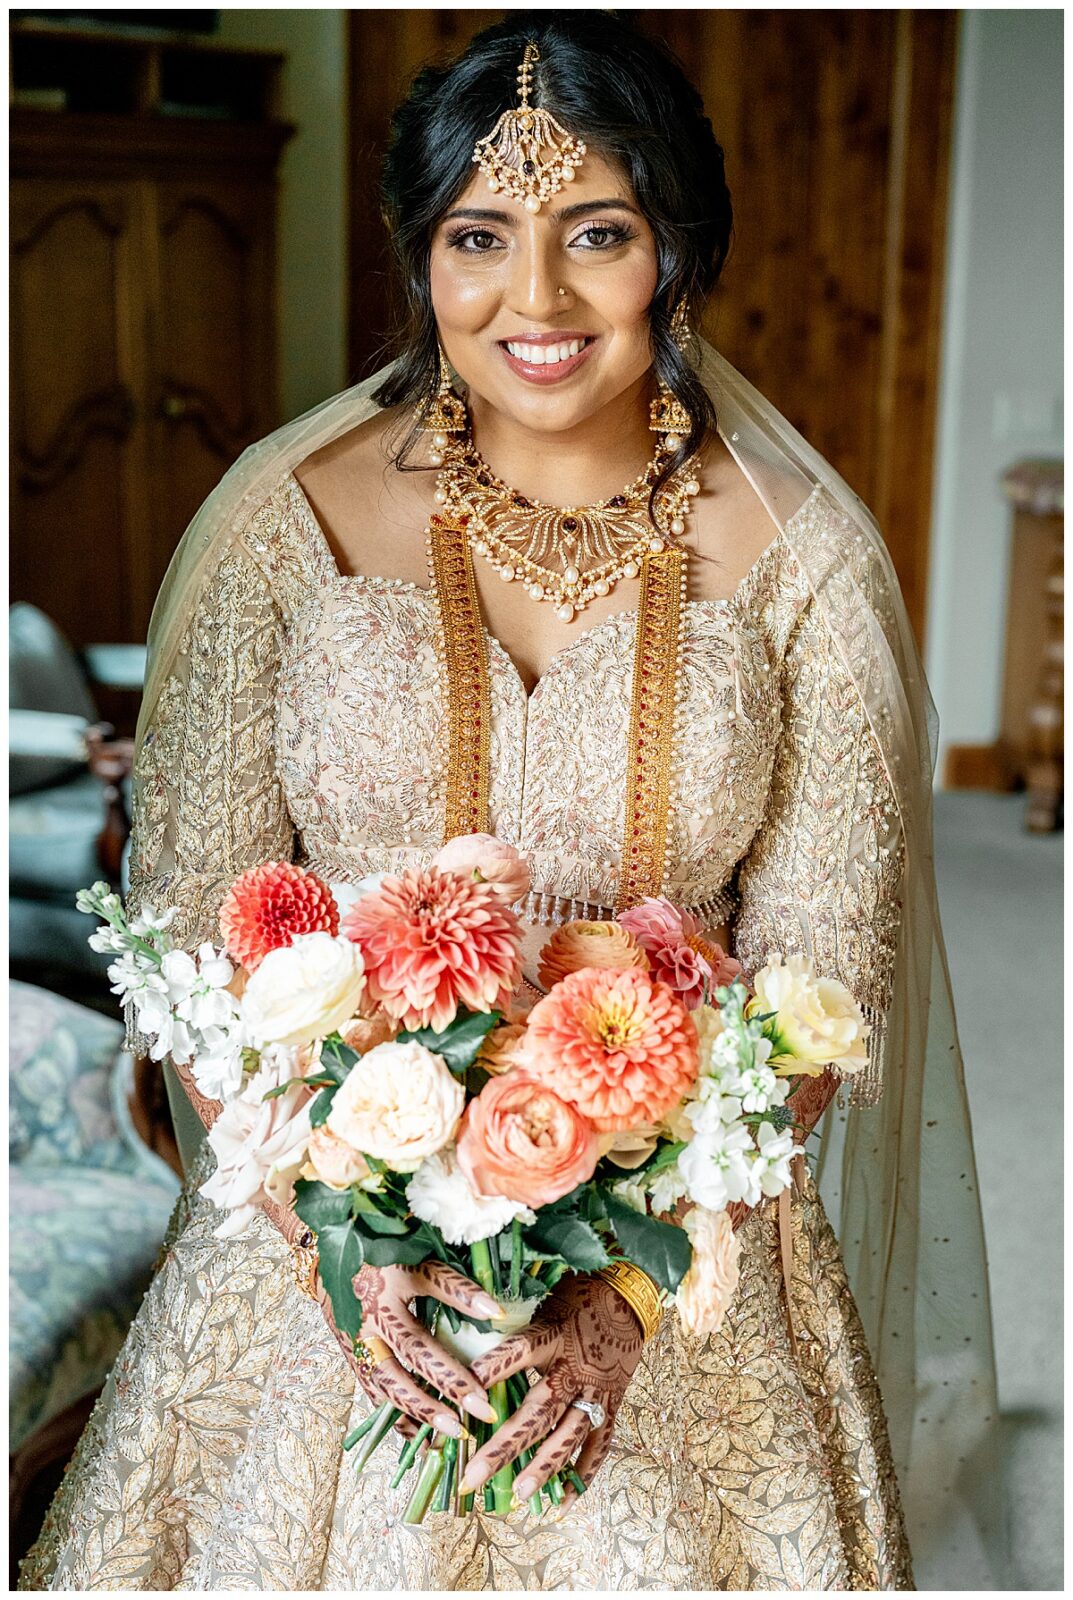 A bride in her traditional Indian wedding dress holding a colorful spring bouquet of flowers at Willow and Oak Estate in Paso Robles.